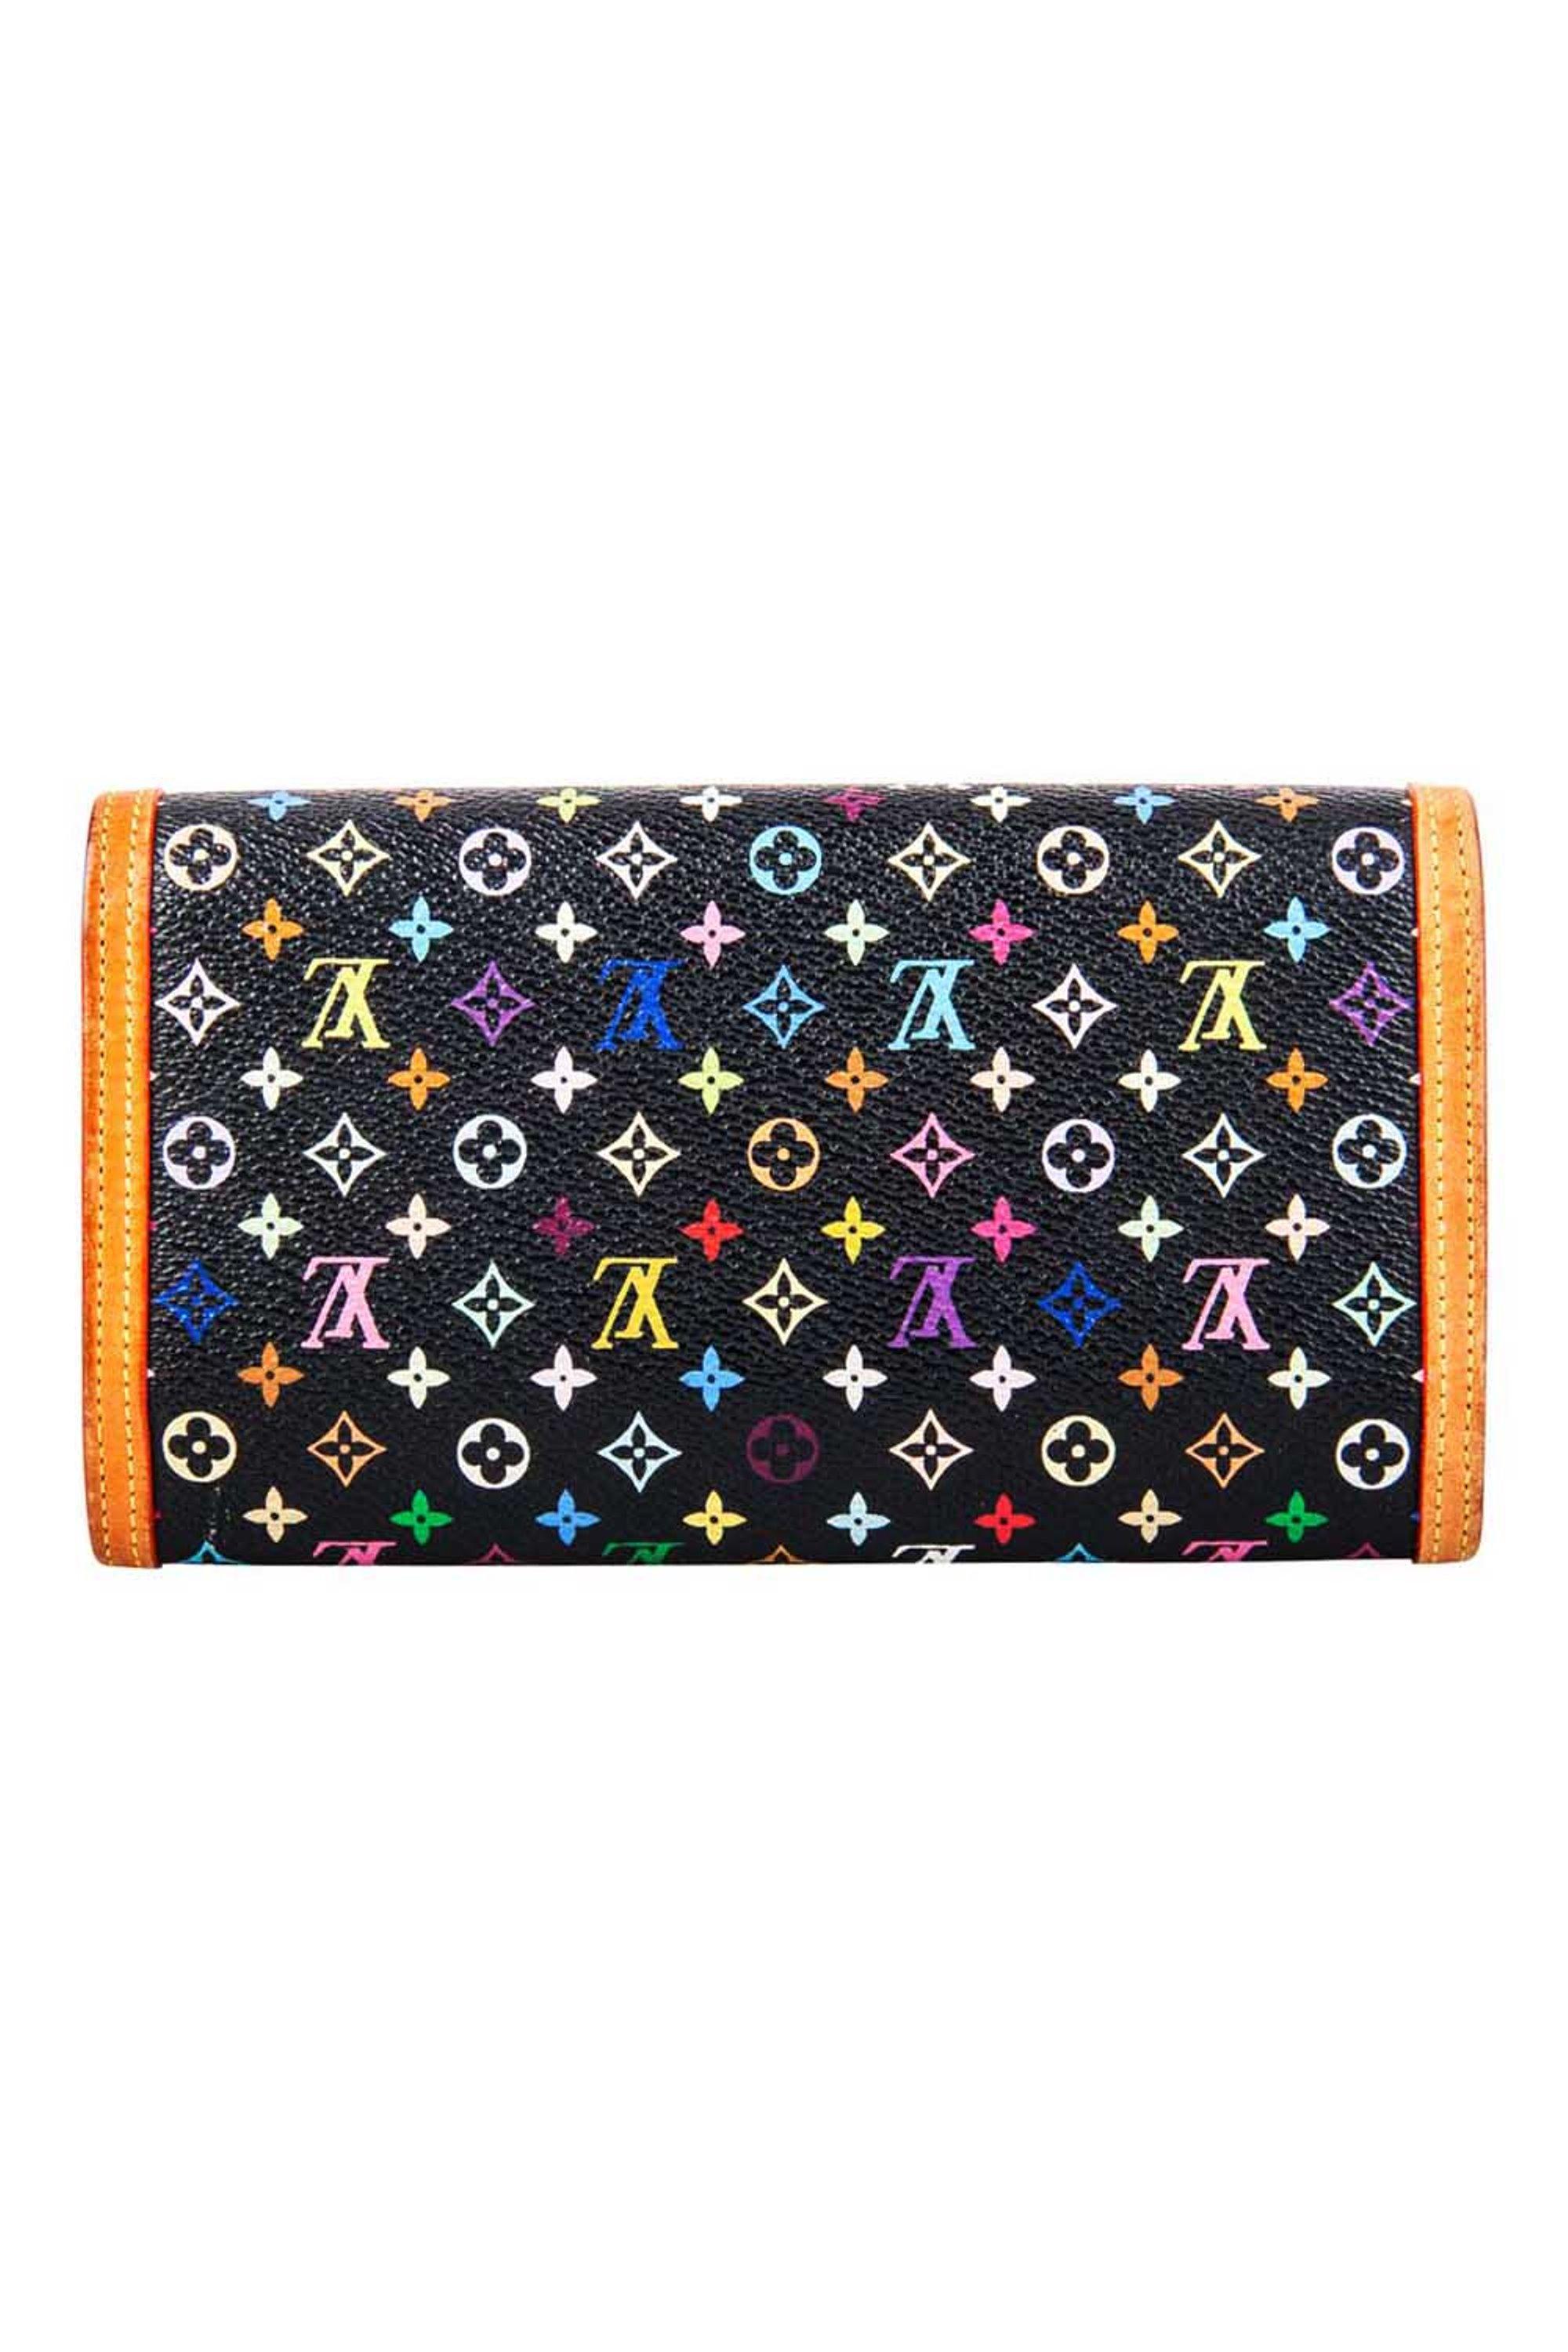 The Louis Vuitton black Multicolore Monogram canvas Porte Tresor wallet is the most elegant way to organise your bills, cards and the number of coins that keep jingling around in your bag. This beautiful piece is a timeless necessity that has been